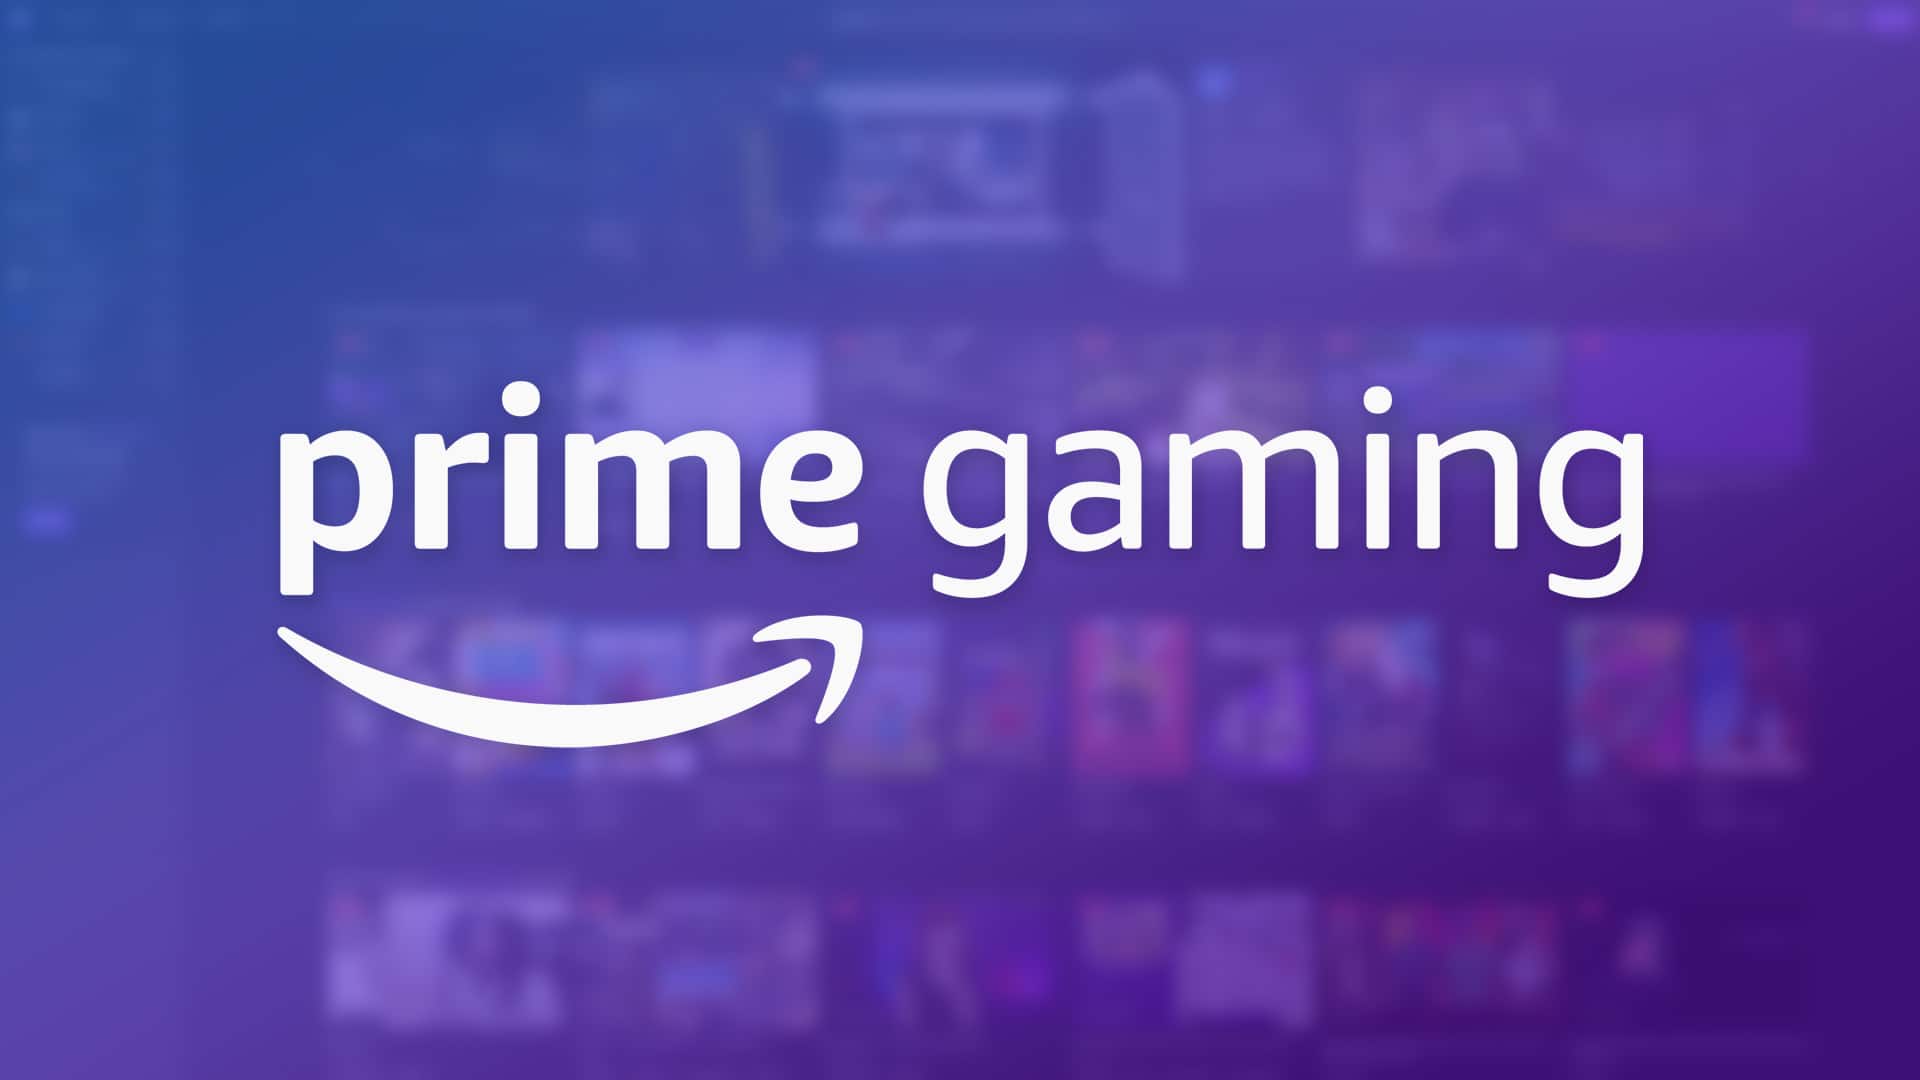 Here's  Prime Gaming's September line-up